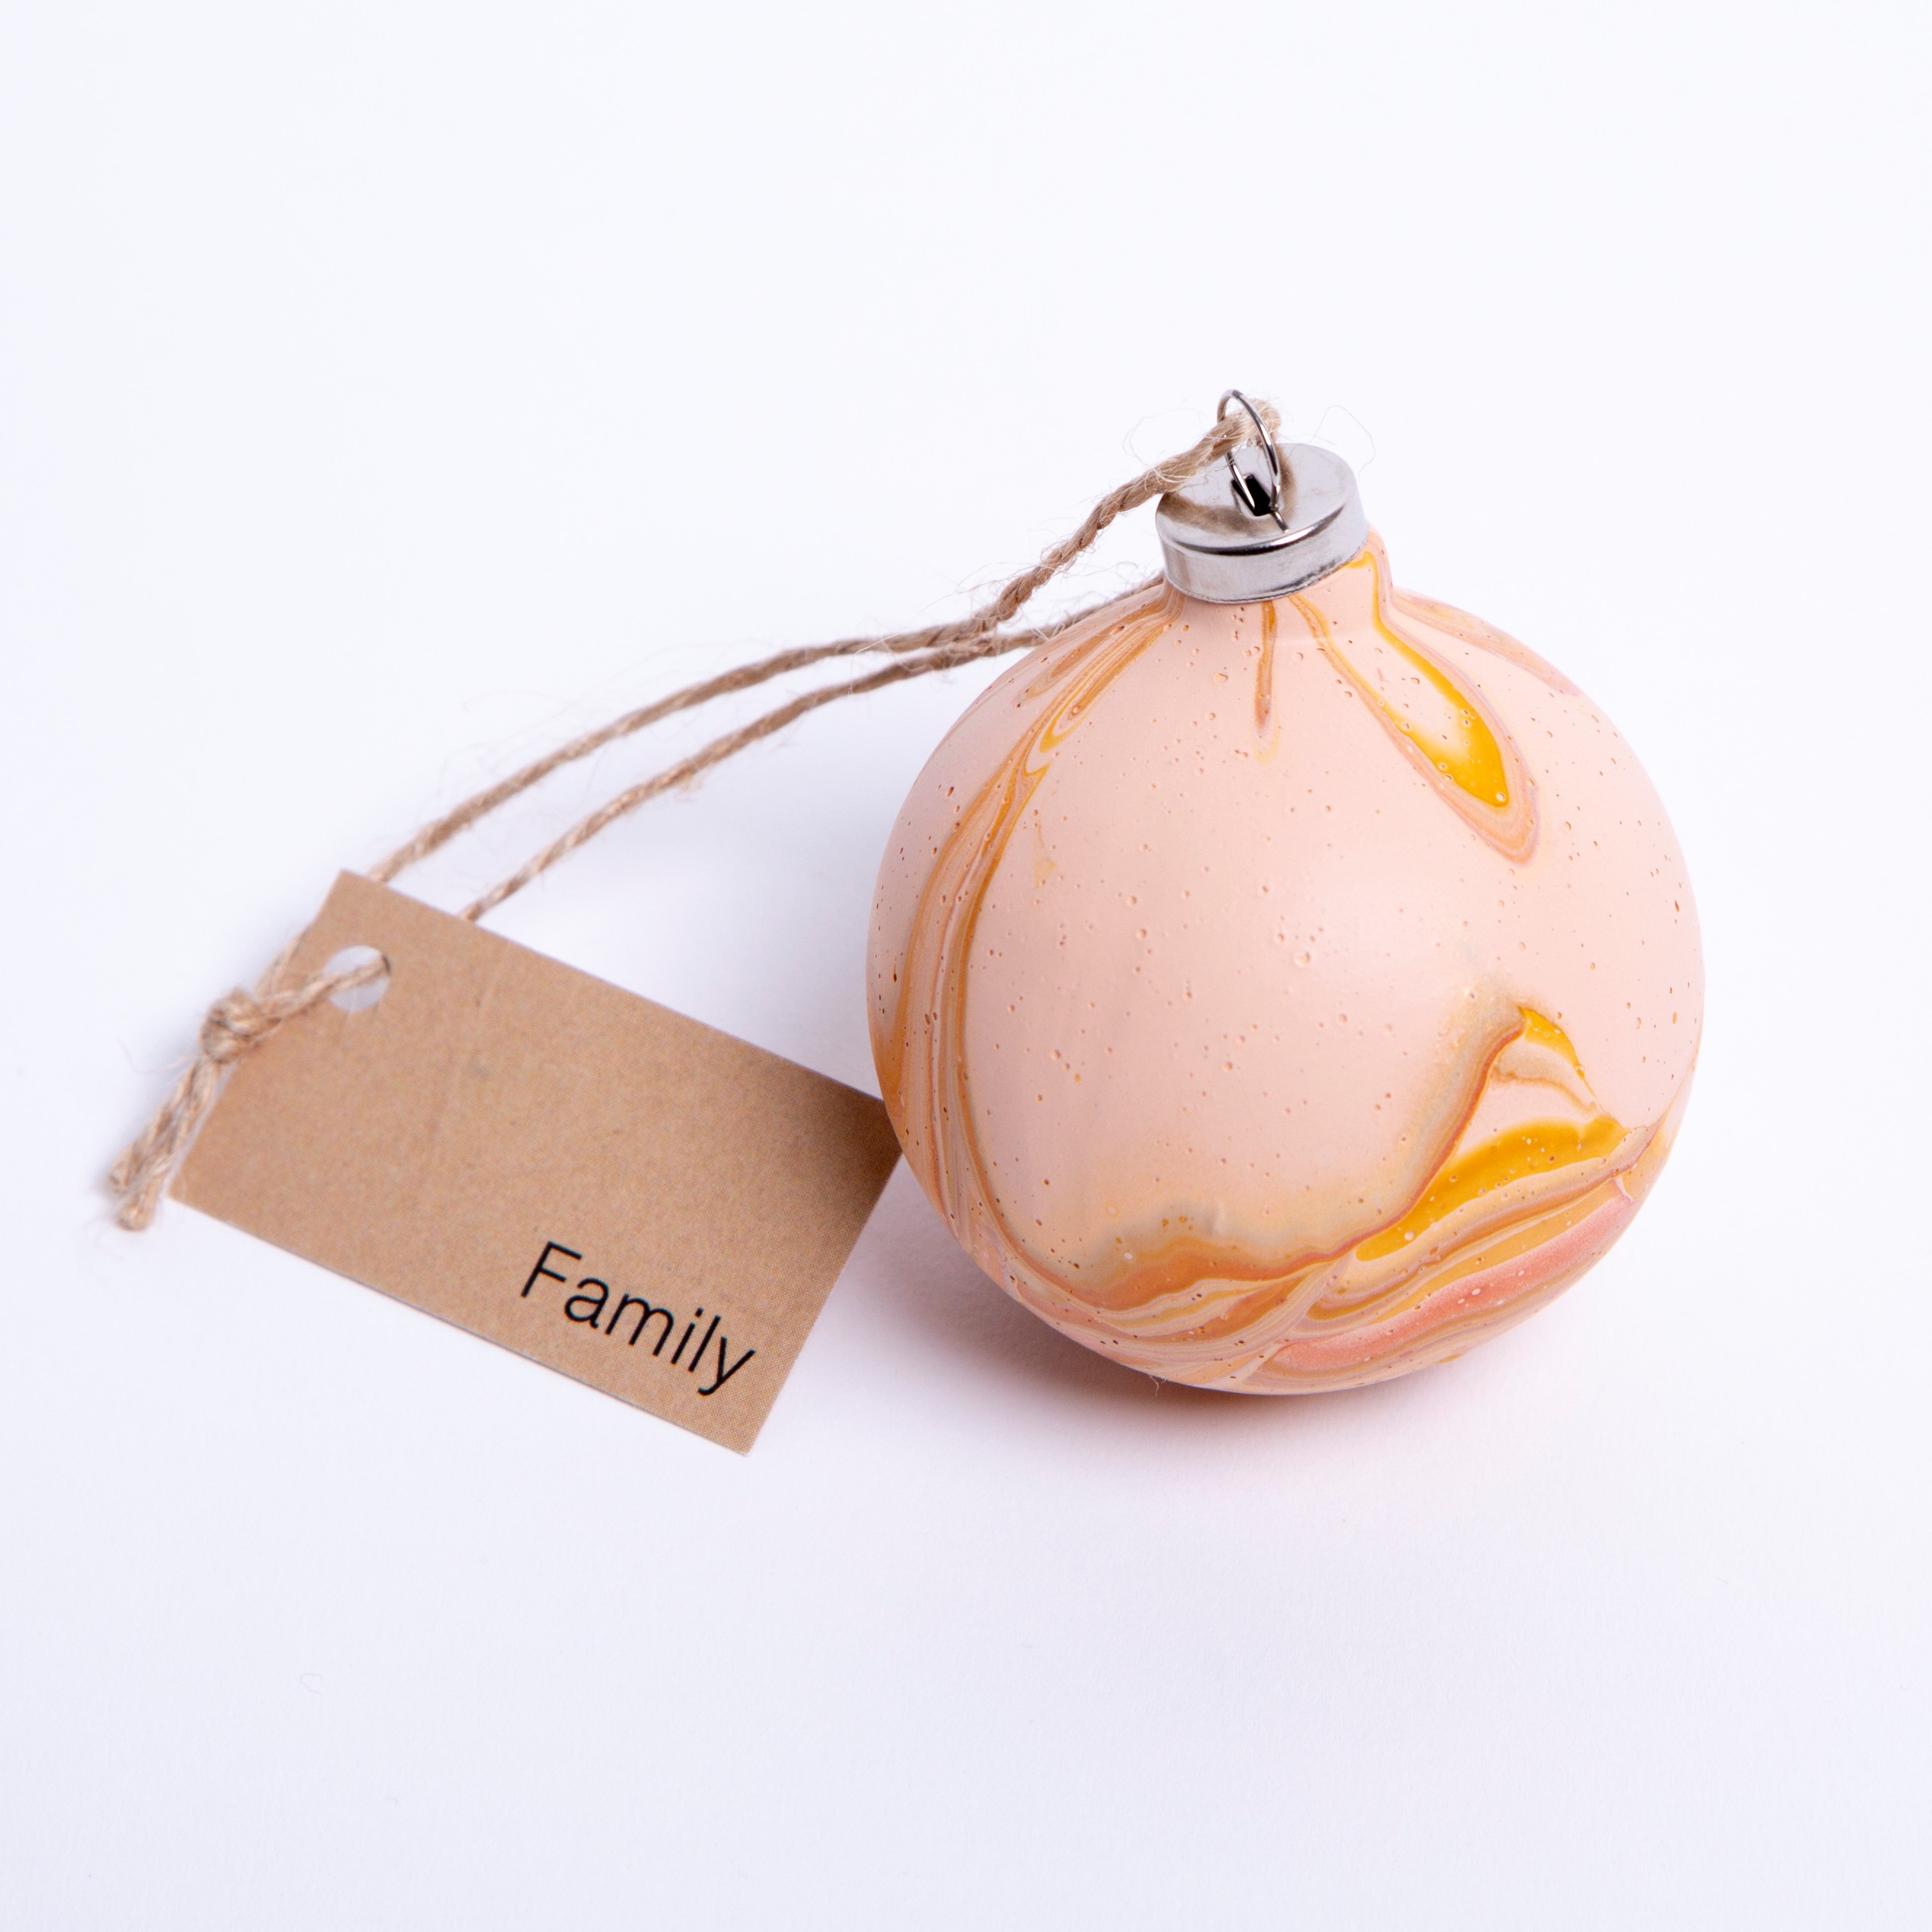 'Family' Pink & Copper Hand Painted Ceramic Bauble - Round Shape